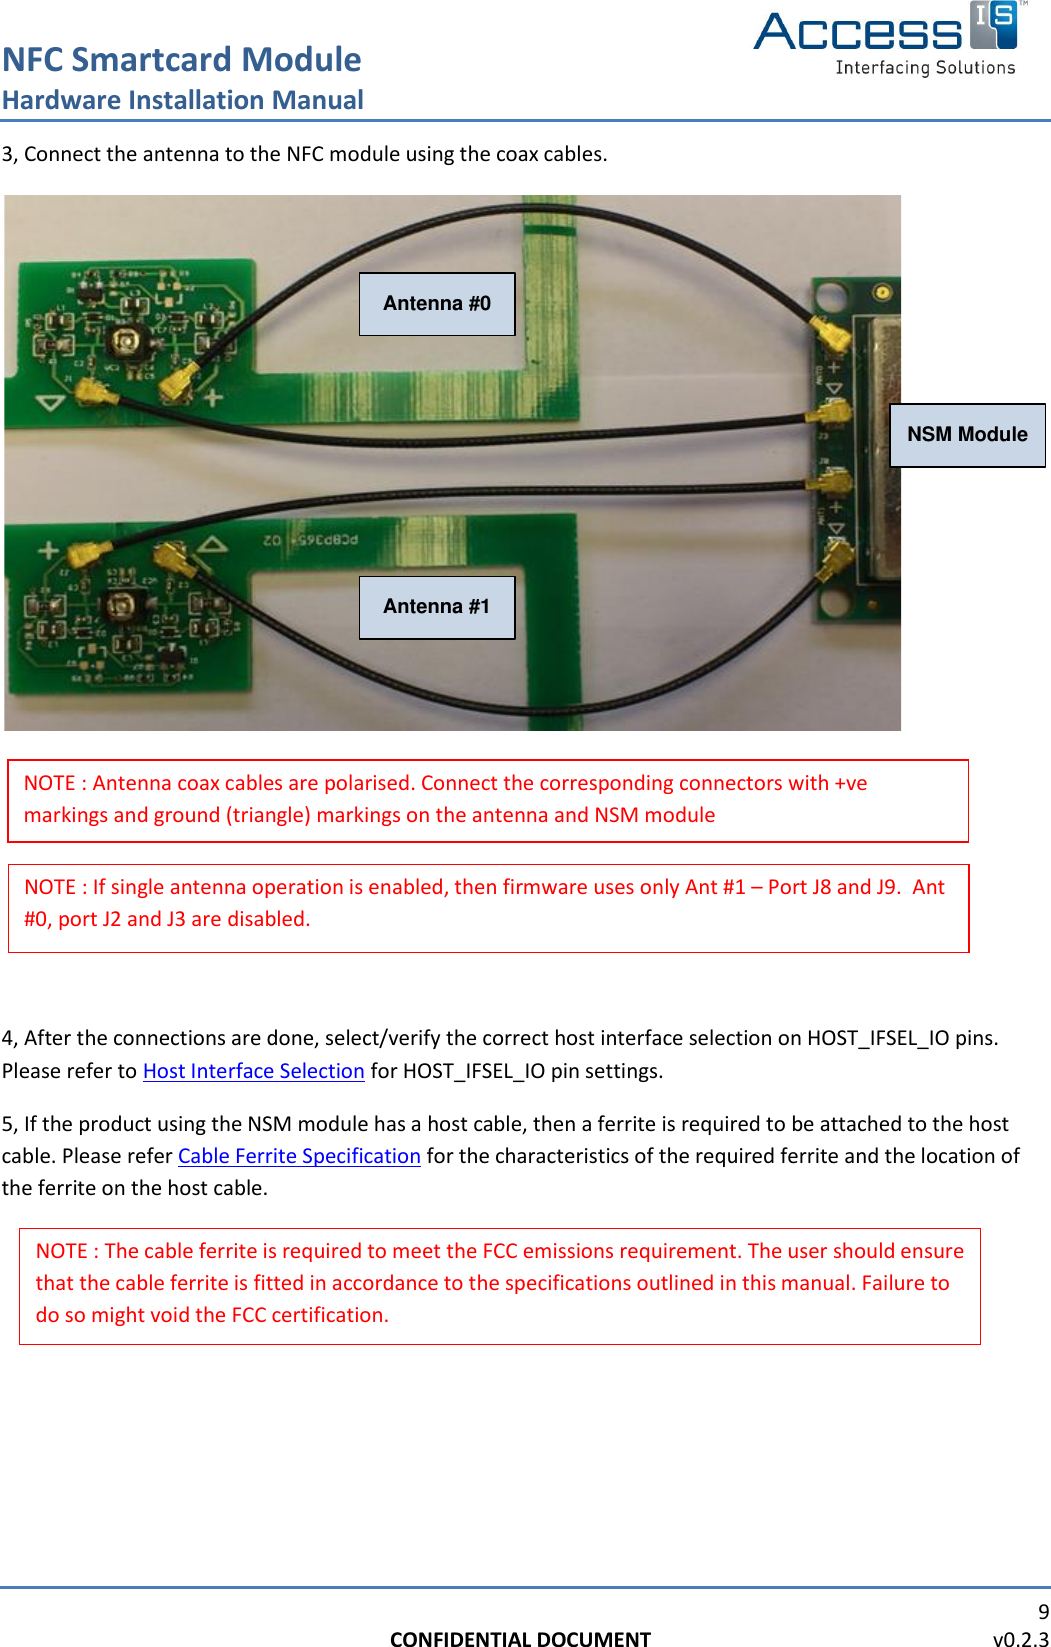 NFC Smartcard Module Hardware Installation Manual   9 CONFIDENTIAL DOCUMENT                                                                  v0.2.3  3, Connect the antenna to the NFC module using the coax cables.  Antenna #0Antenna #1NSM Module        4, After the connections are done, select/verify the correct host interface selection on HOST_IFSEL_IO pins. Please refer to Host Interface Selection for HOST_IFSEL_IO pin settings. 5, If the product using the NSM module has a host cable, then a ferrite is required to be attached to the host cable. Please refer Cable Ferrite Specification for the characteristics of the required ferrite and the location of the ferrite on the host cable.      NOTE : If single antenna operation is enabled, then firmware uses only Ant #1 – Port J8 and J9.  Ant #0, port J2 and J3 are disabled. NOTE : Antenna coax cables are polarised. Connect the corresponding connectors with +ve markings and ground (triangle) markings on the antenna and NSM module  NOTE : The cable ferrite is required to meet the FCC emissions requirement. The user should ensure that the cable ferrite is fitted in accordance to the specifications outlined in this manual. Failure to do so might void the FCC certification. 